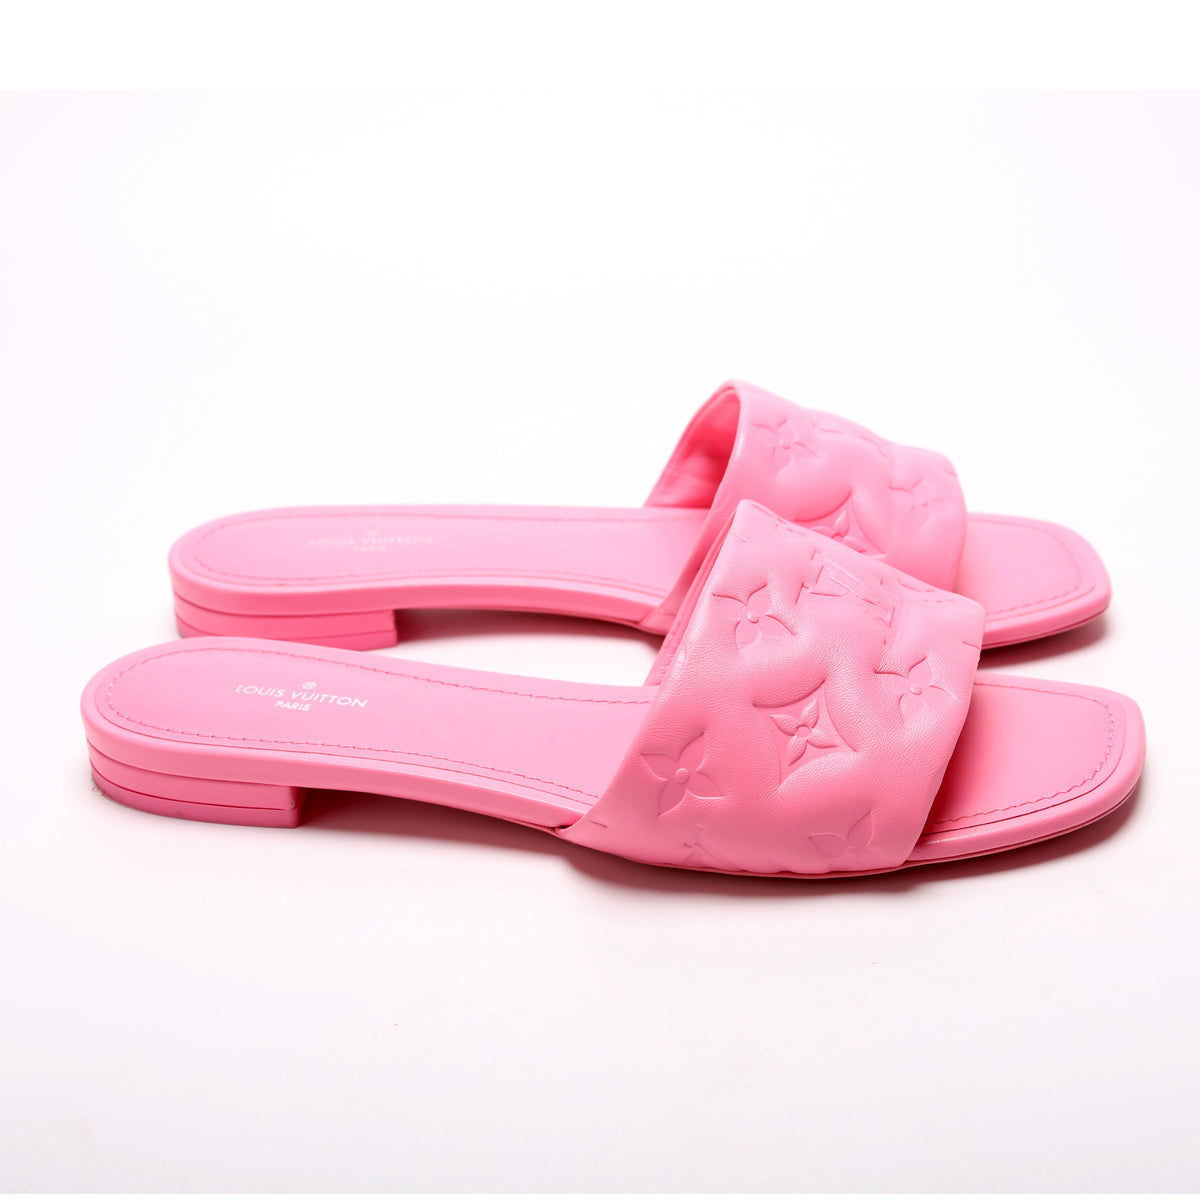 Louis Vuitton - Authenticated Revival Sandal - Leather Pink for Women, Never Worn, with Tag